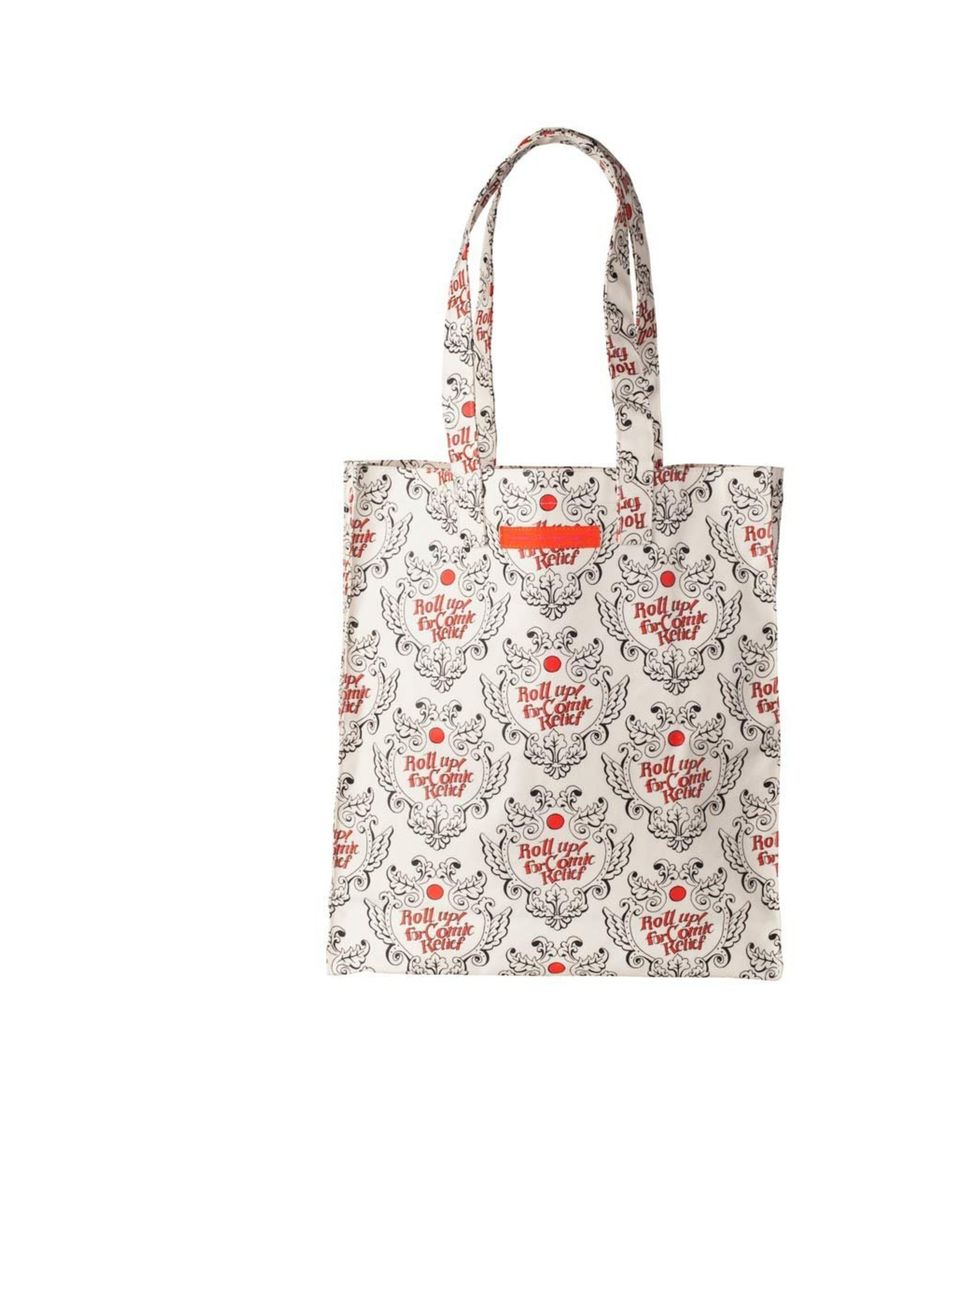 <p>Emma Bridgewater bag, £9.99 (with at least £4 going to Comic Relief), available at <a href="http://www.tkmaxx.com/page/home">TK Maxx</a></p>